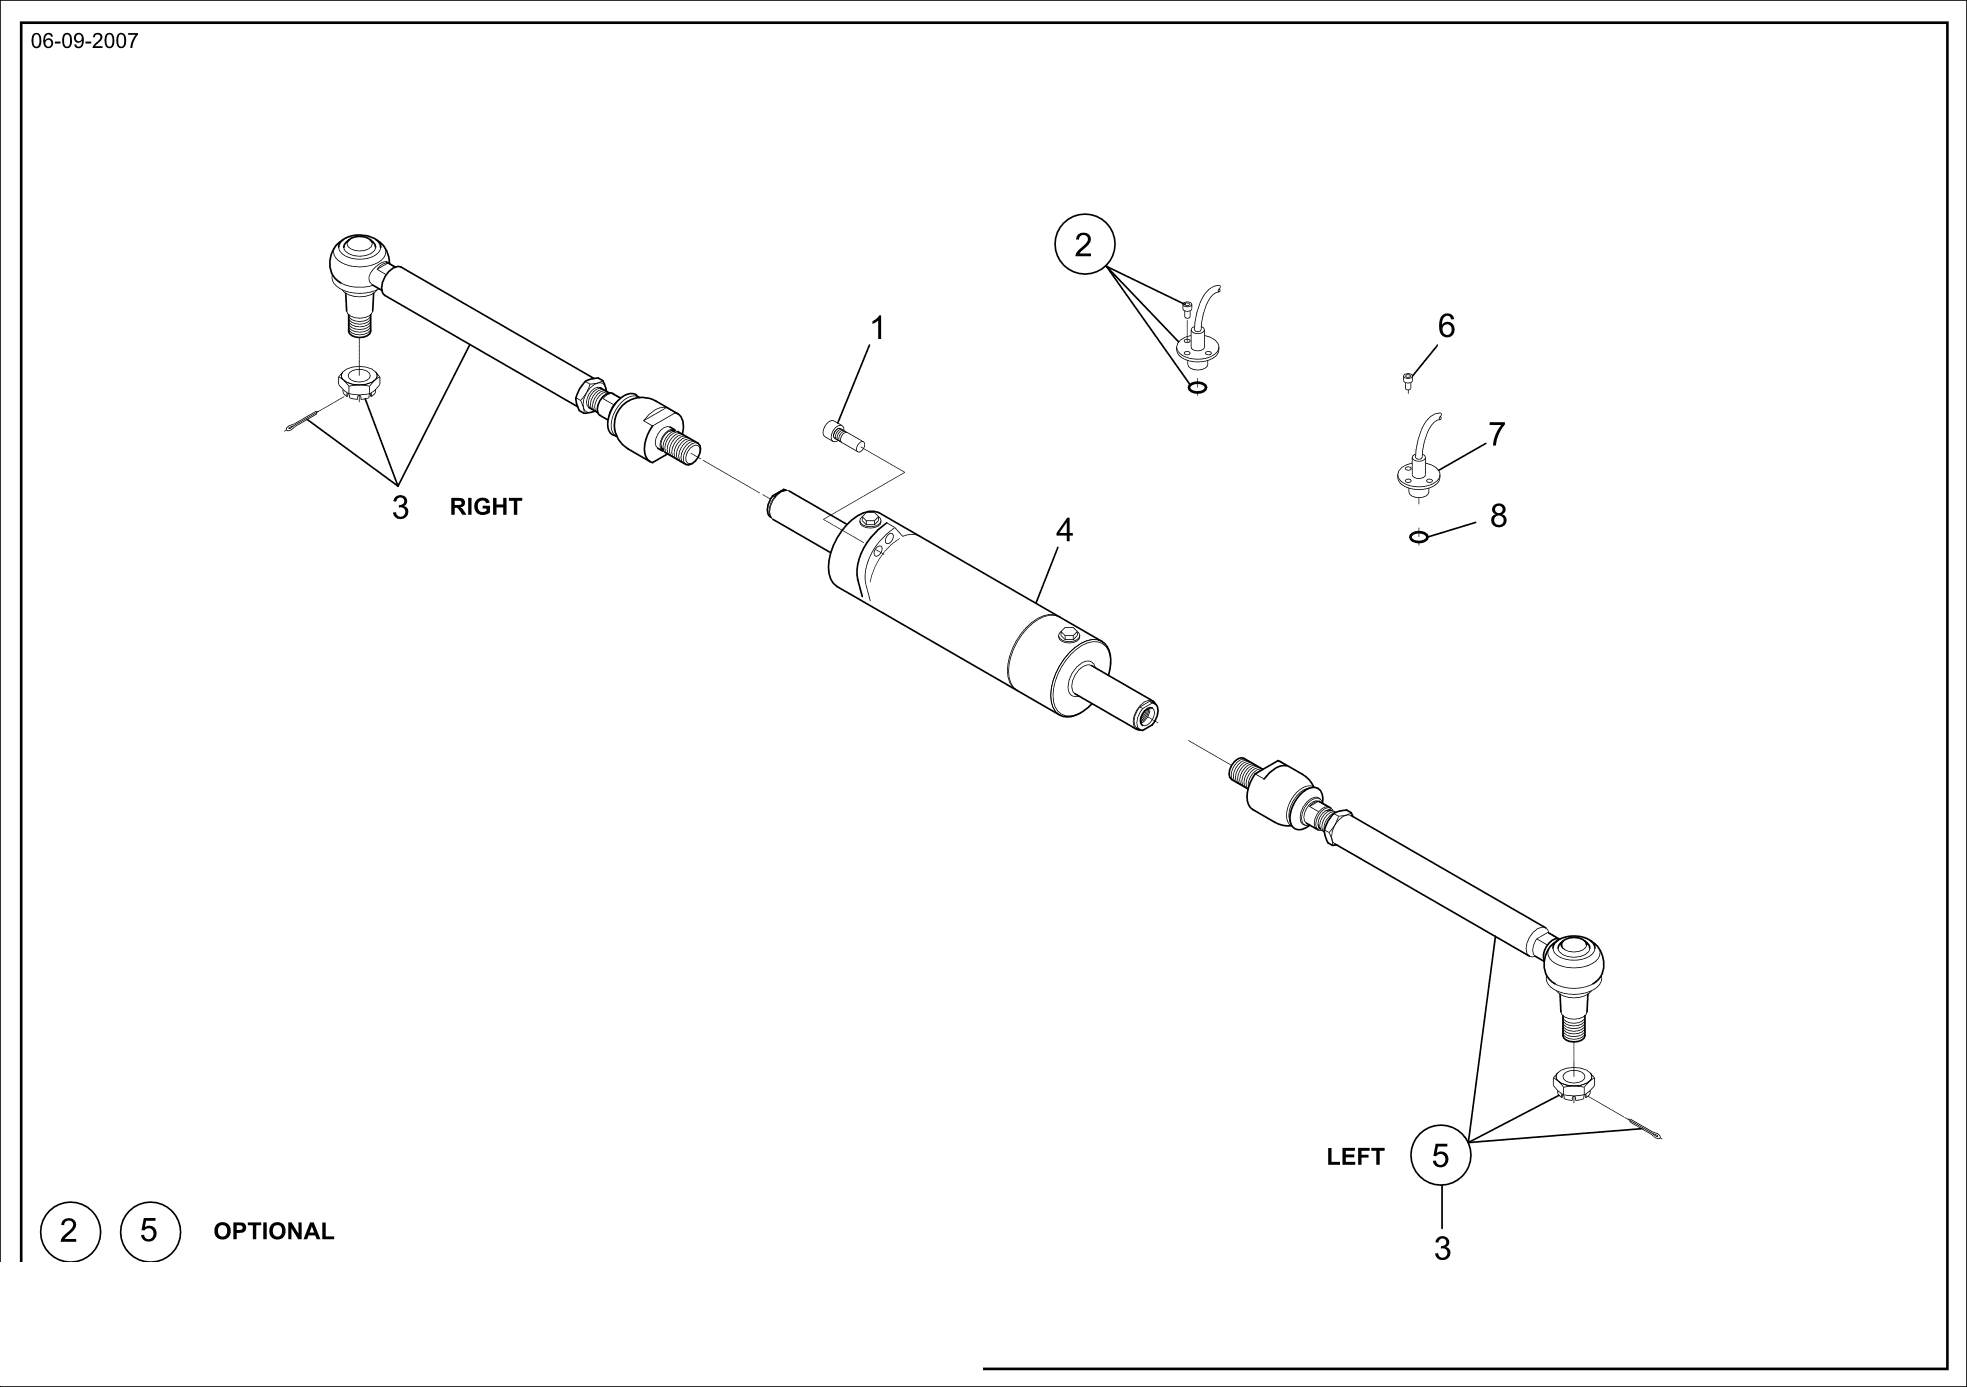 drawing for CNH NEW HOLLAND 71439518 - ARTICULATED TIE ROD (figure 1)